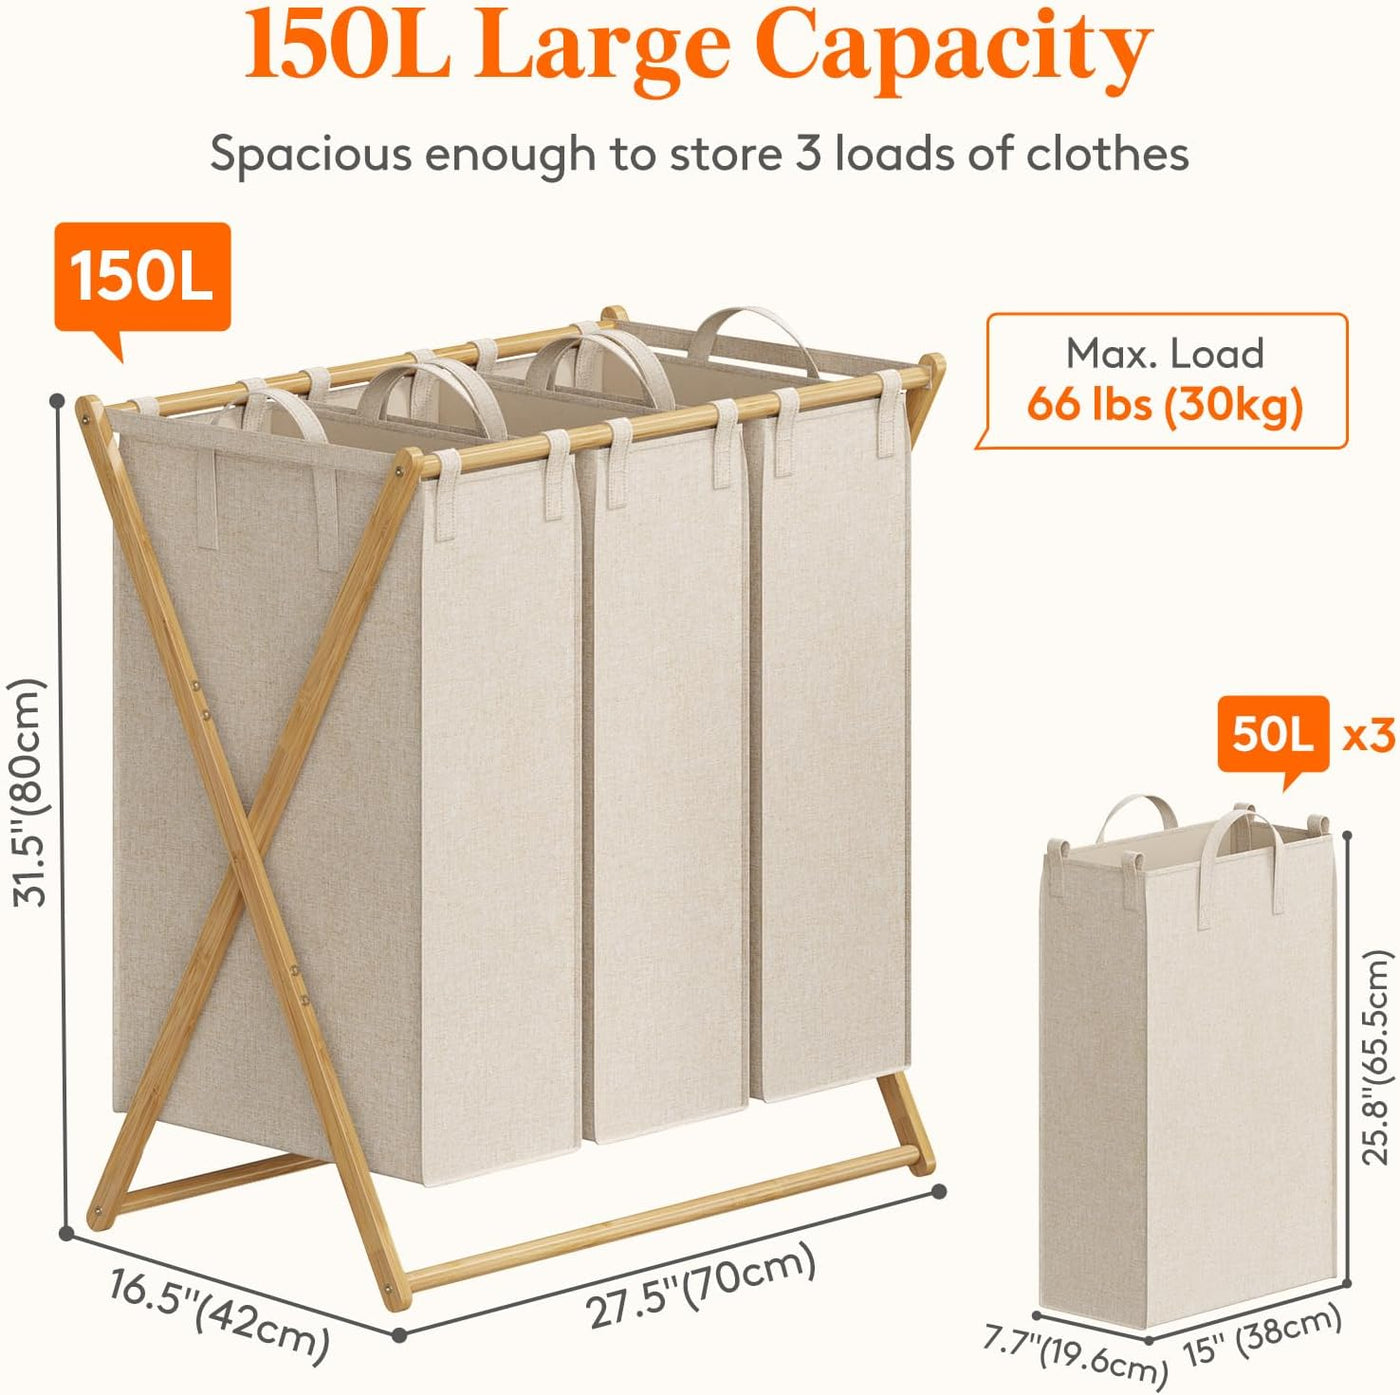 Lifewit 150L Bamboo Laundry Hamper with 3 Compartments, Foldable Basket